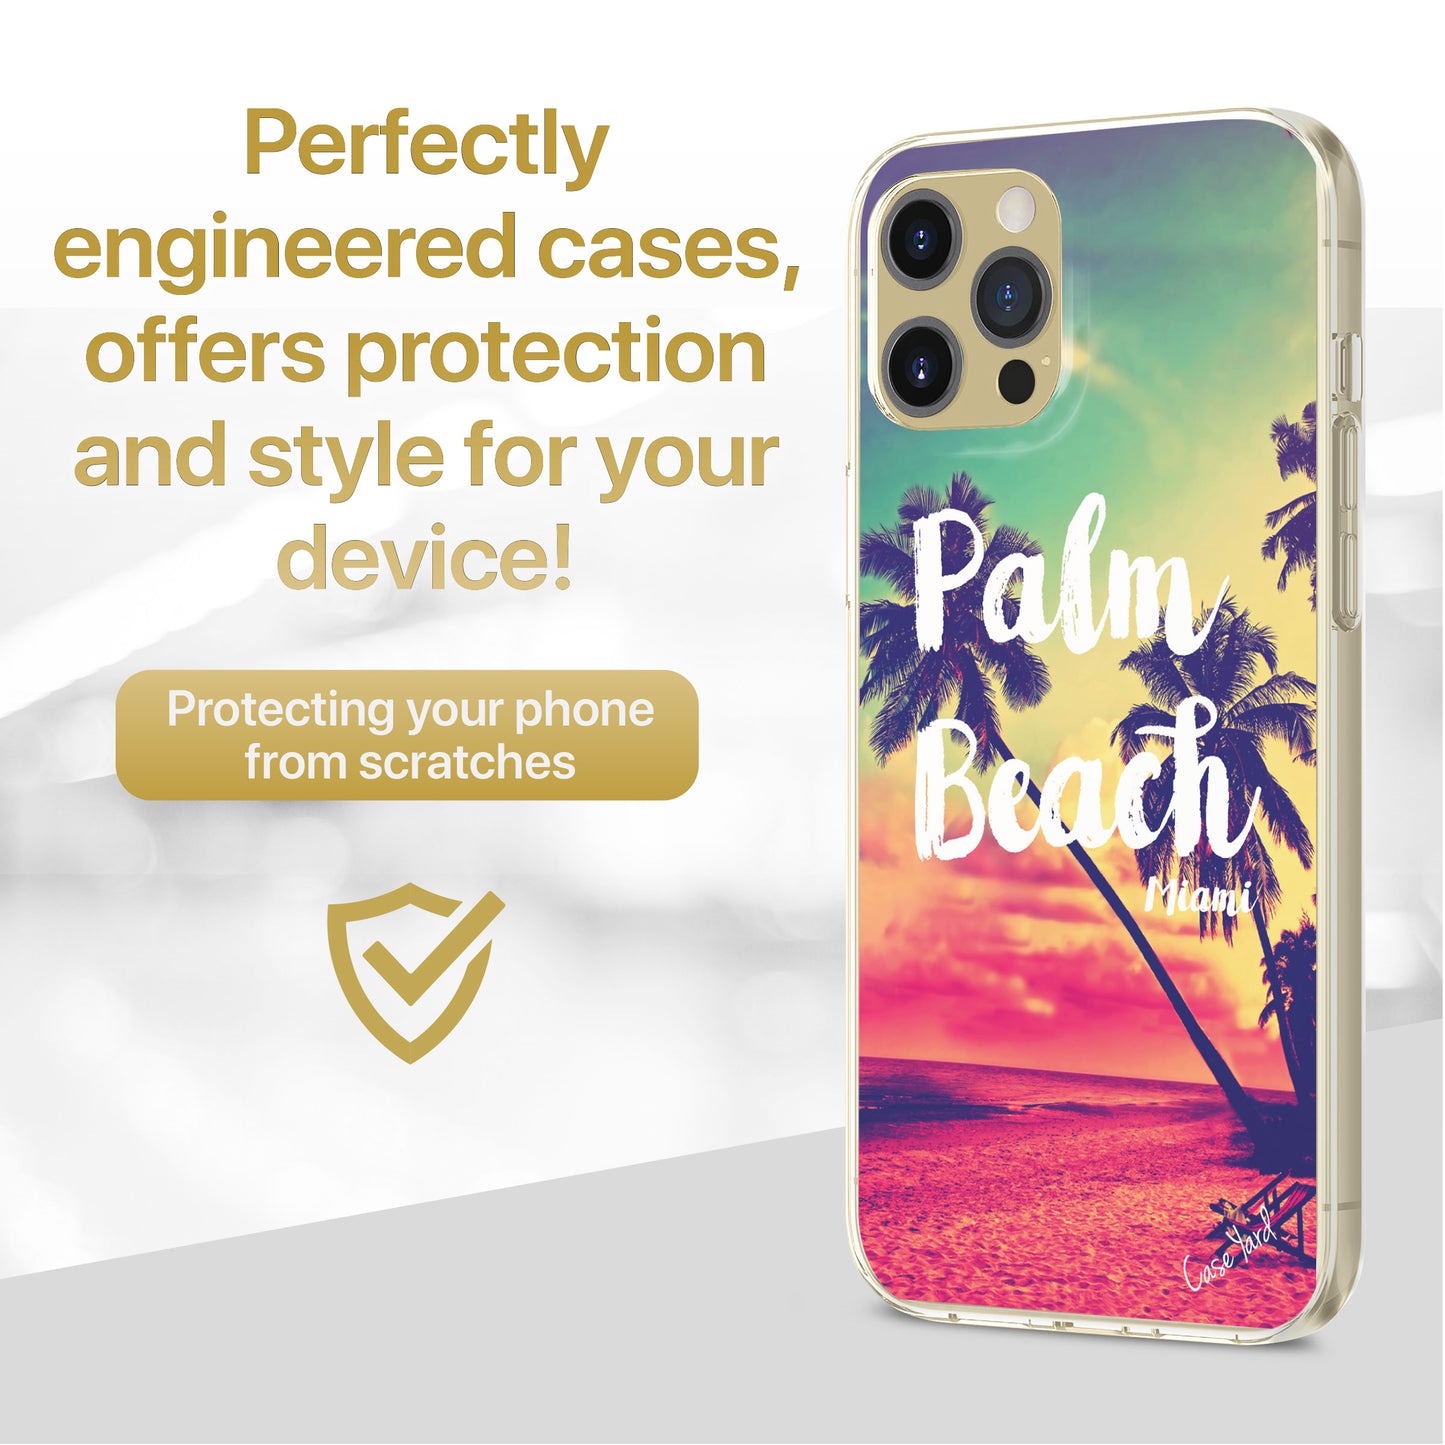 TPU Clear case with (Palm Beach) Design for iPhone & Samsung Phones